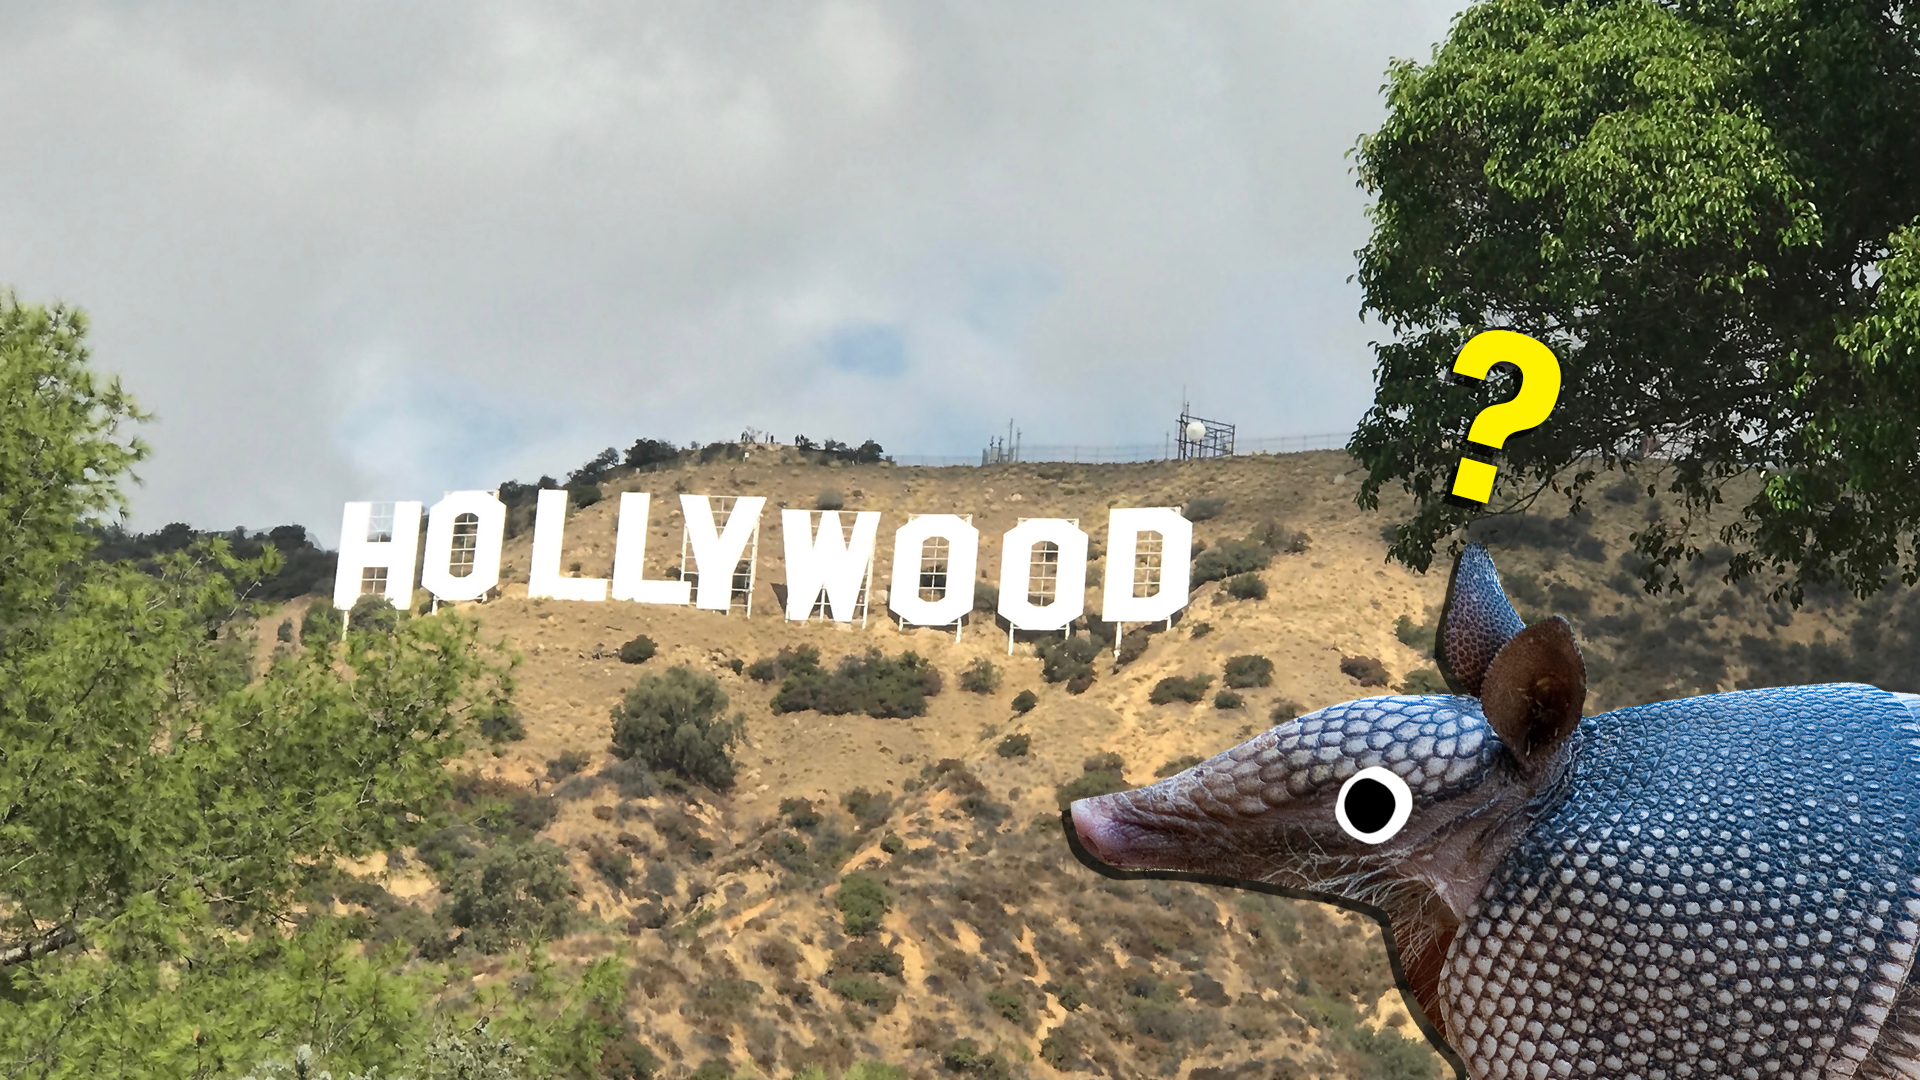 An armadillo looks at the Hollywood sign in Los Angeles